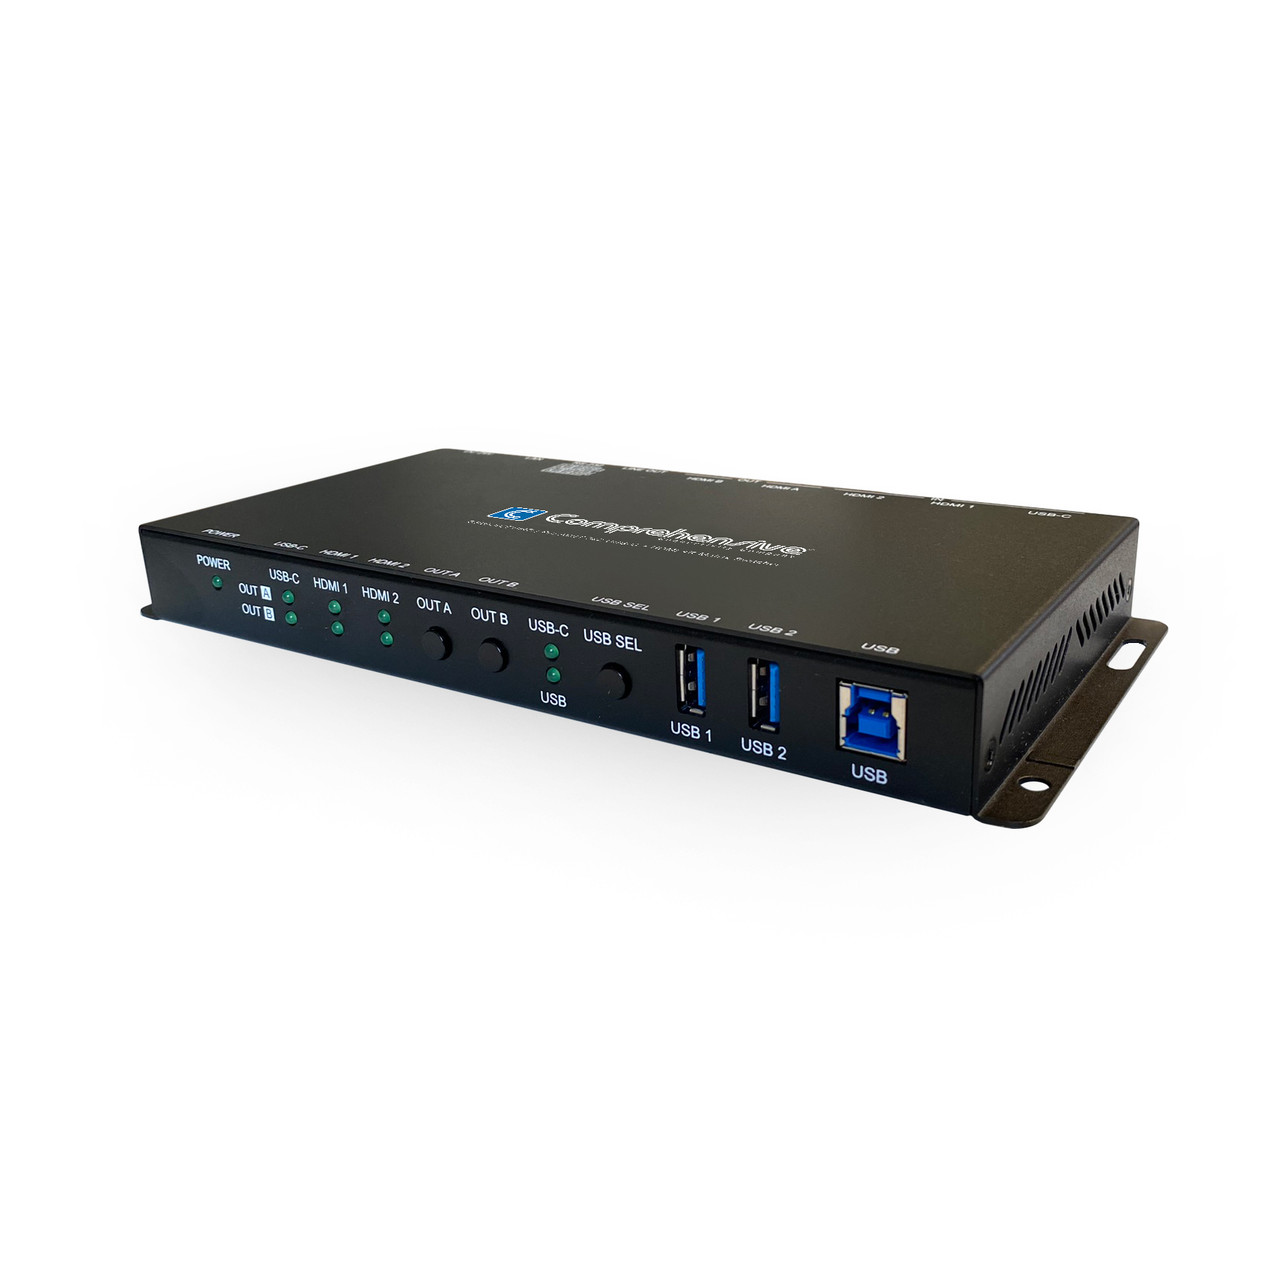 Cable Matters 4 Port USB 3.0 Switch Hub/KVM Switch, USB Switcher for 4  Computers and USB Peripherals - Button or Wireless Remote Control Swapping  